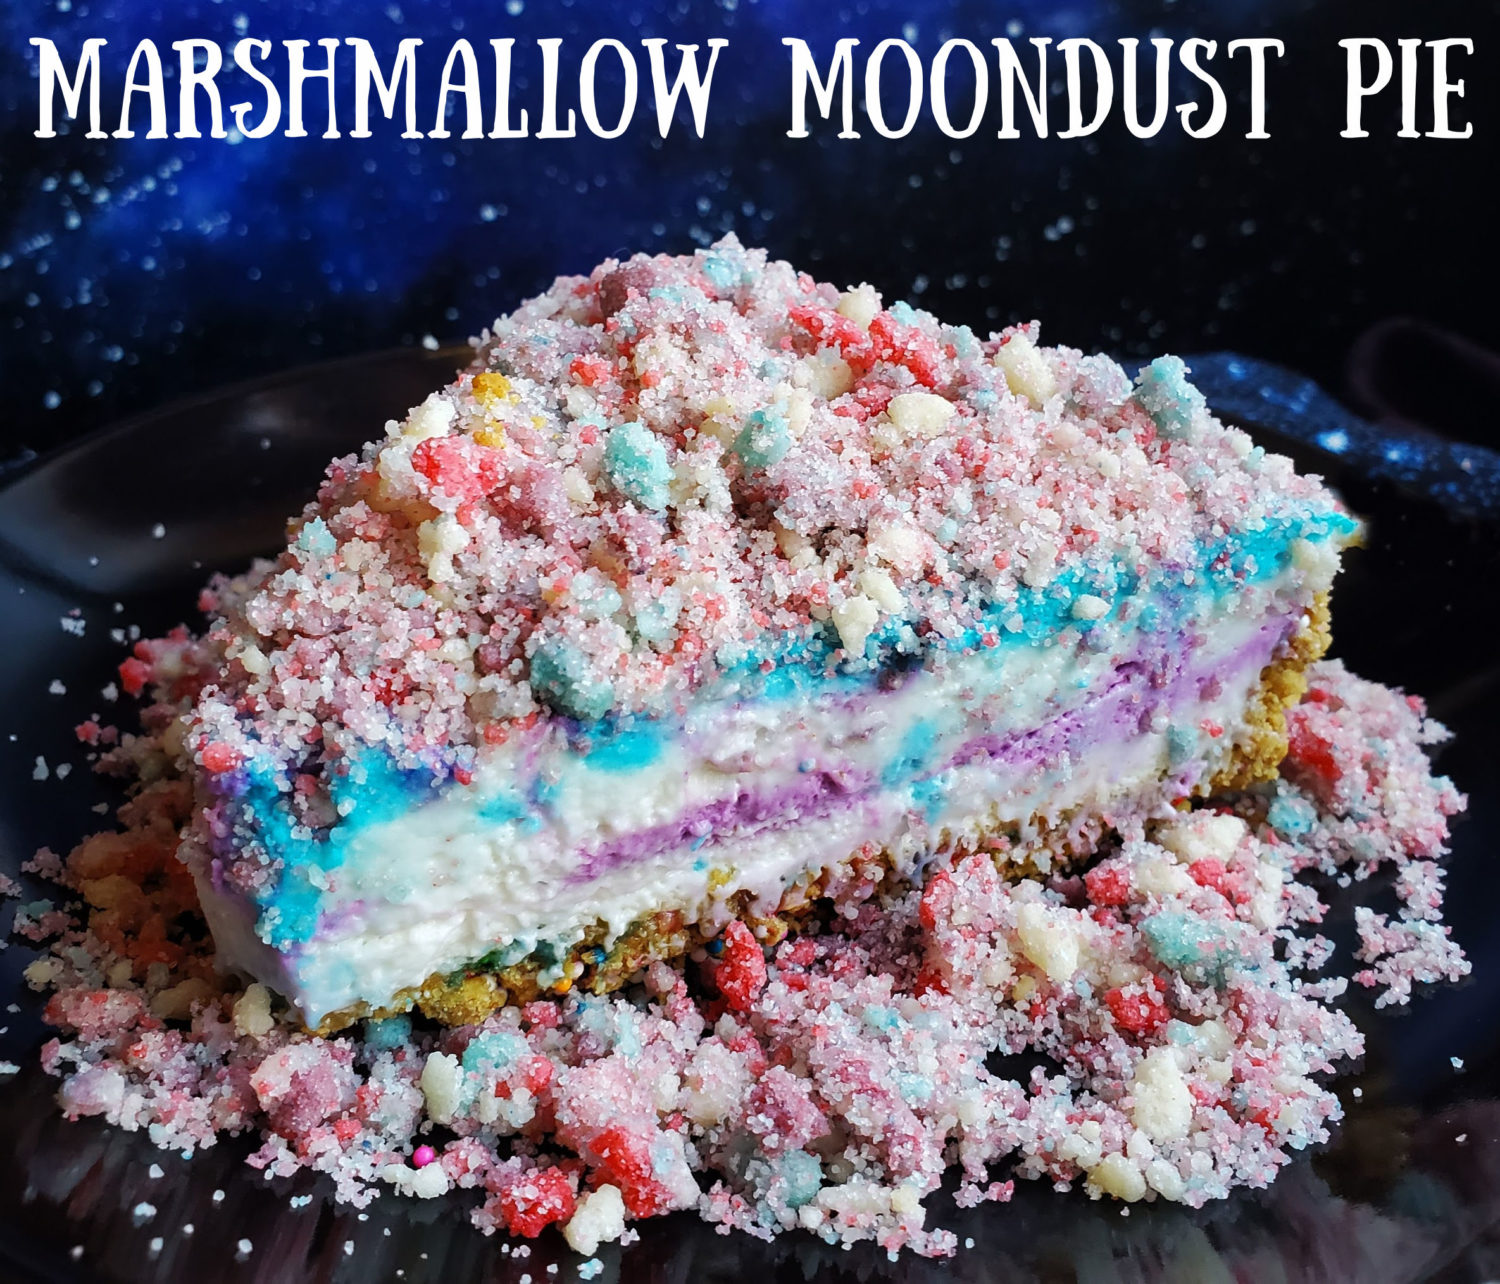 Marshmallow Moondust Pie: Creamy vanilla marshmallow filling with a swirl of color and topped with homemade fruity moondust crumbles.  